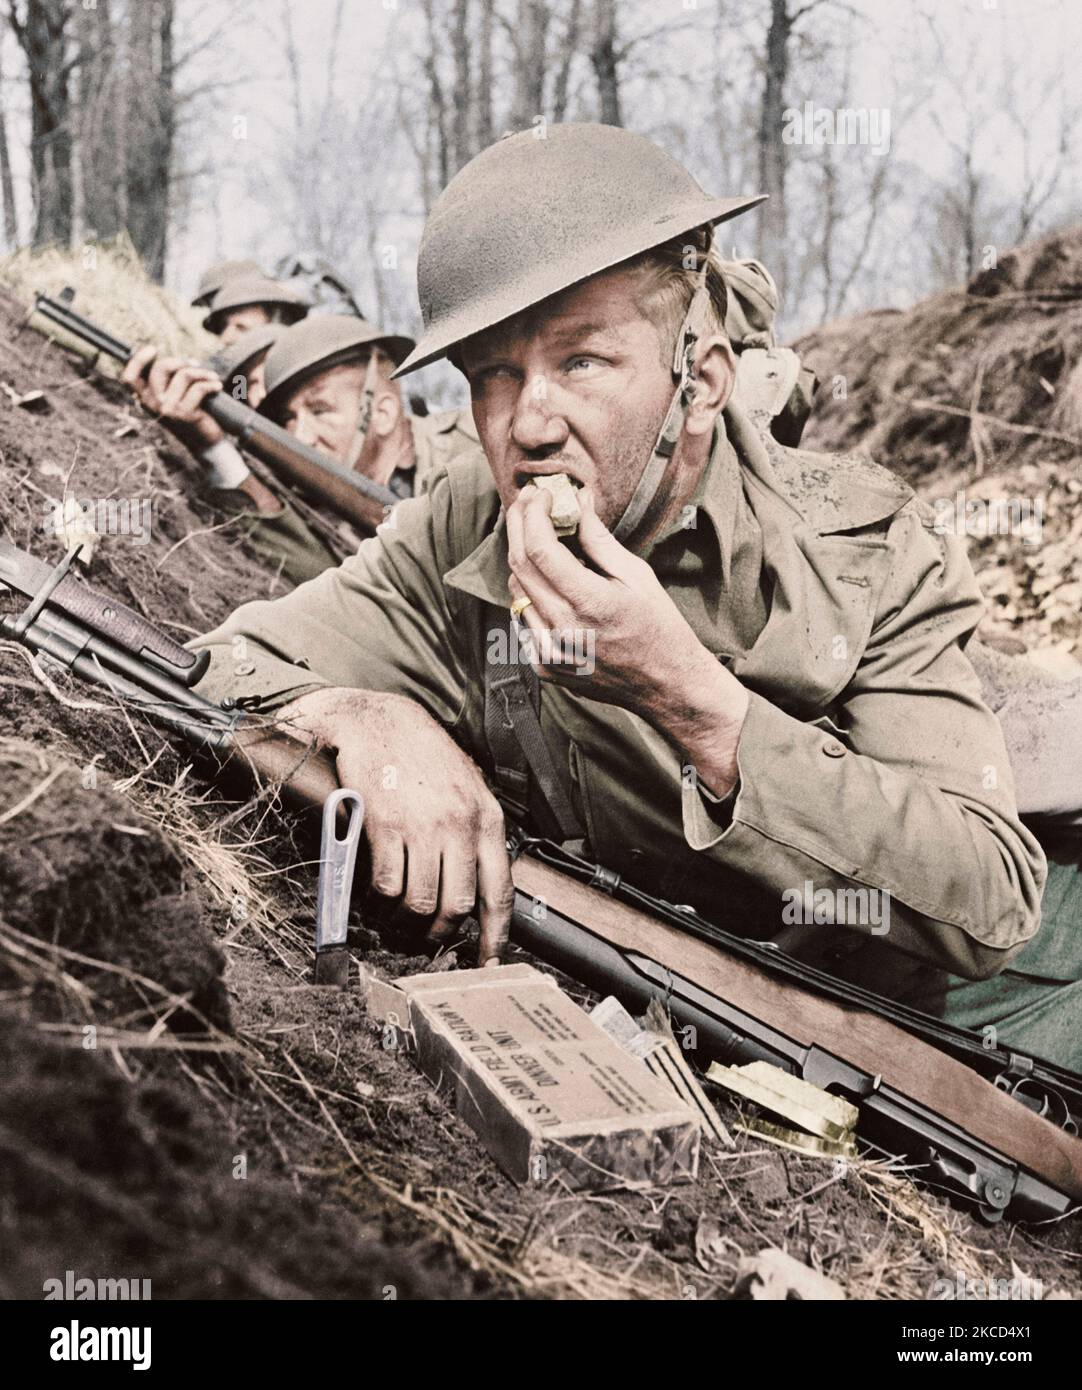 U.S. soldier eating field ration, circa 1942. Stock Photo